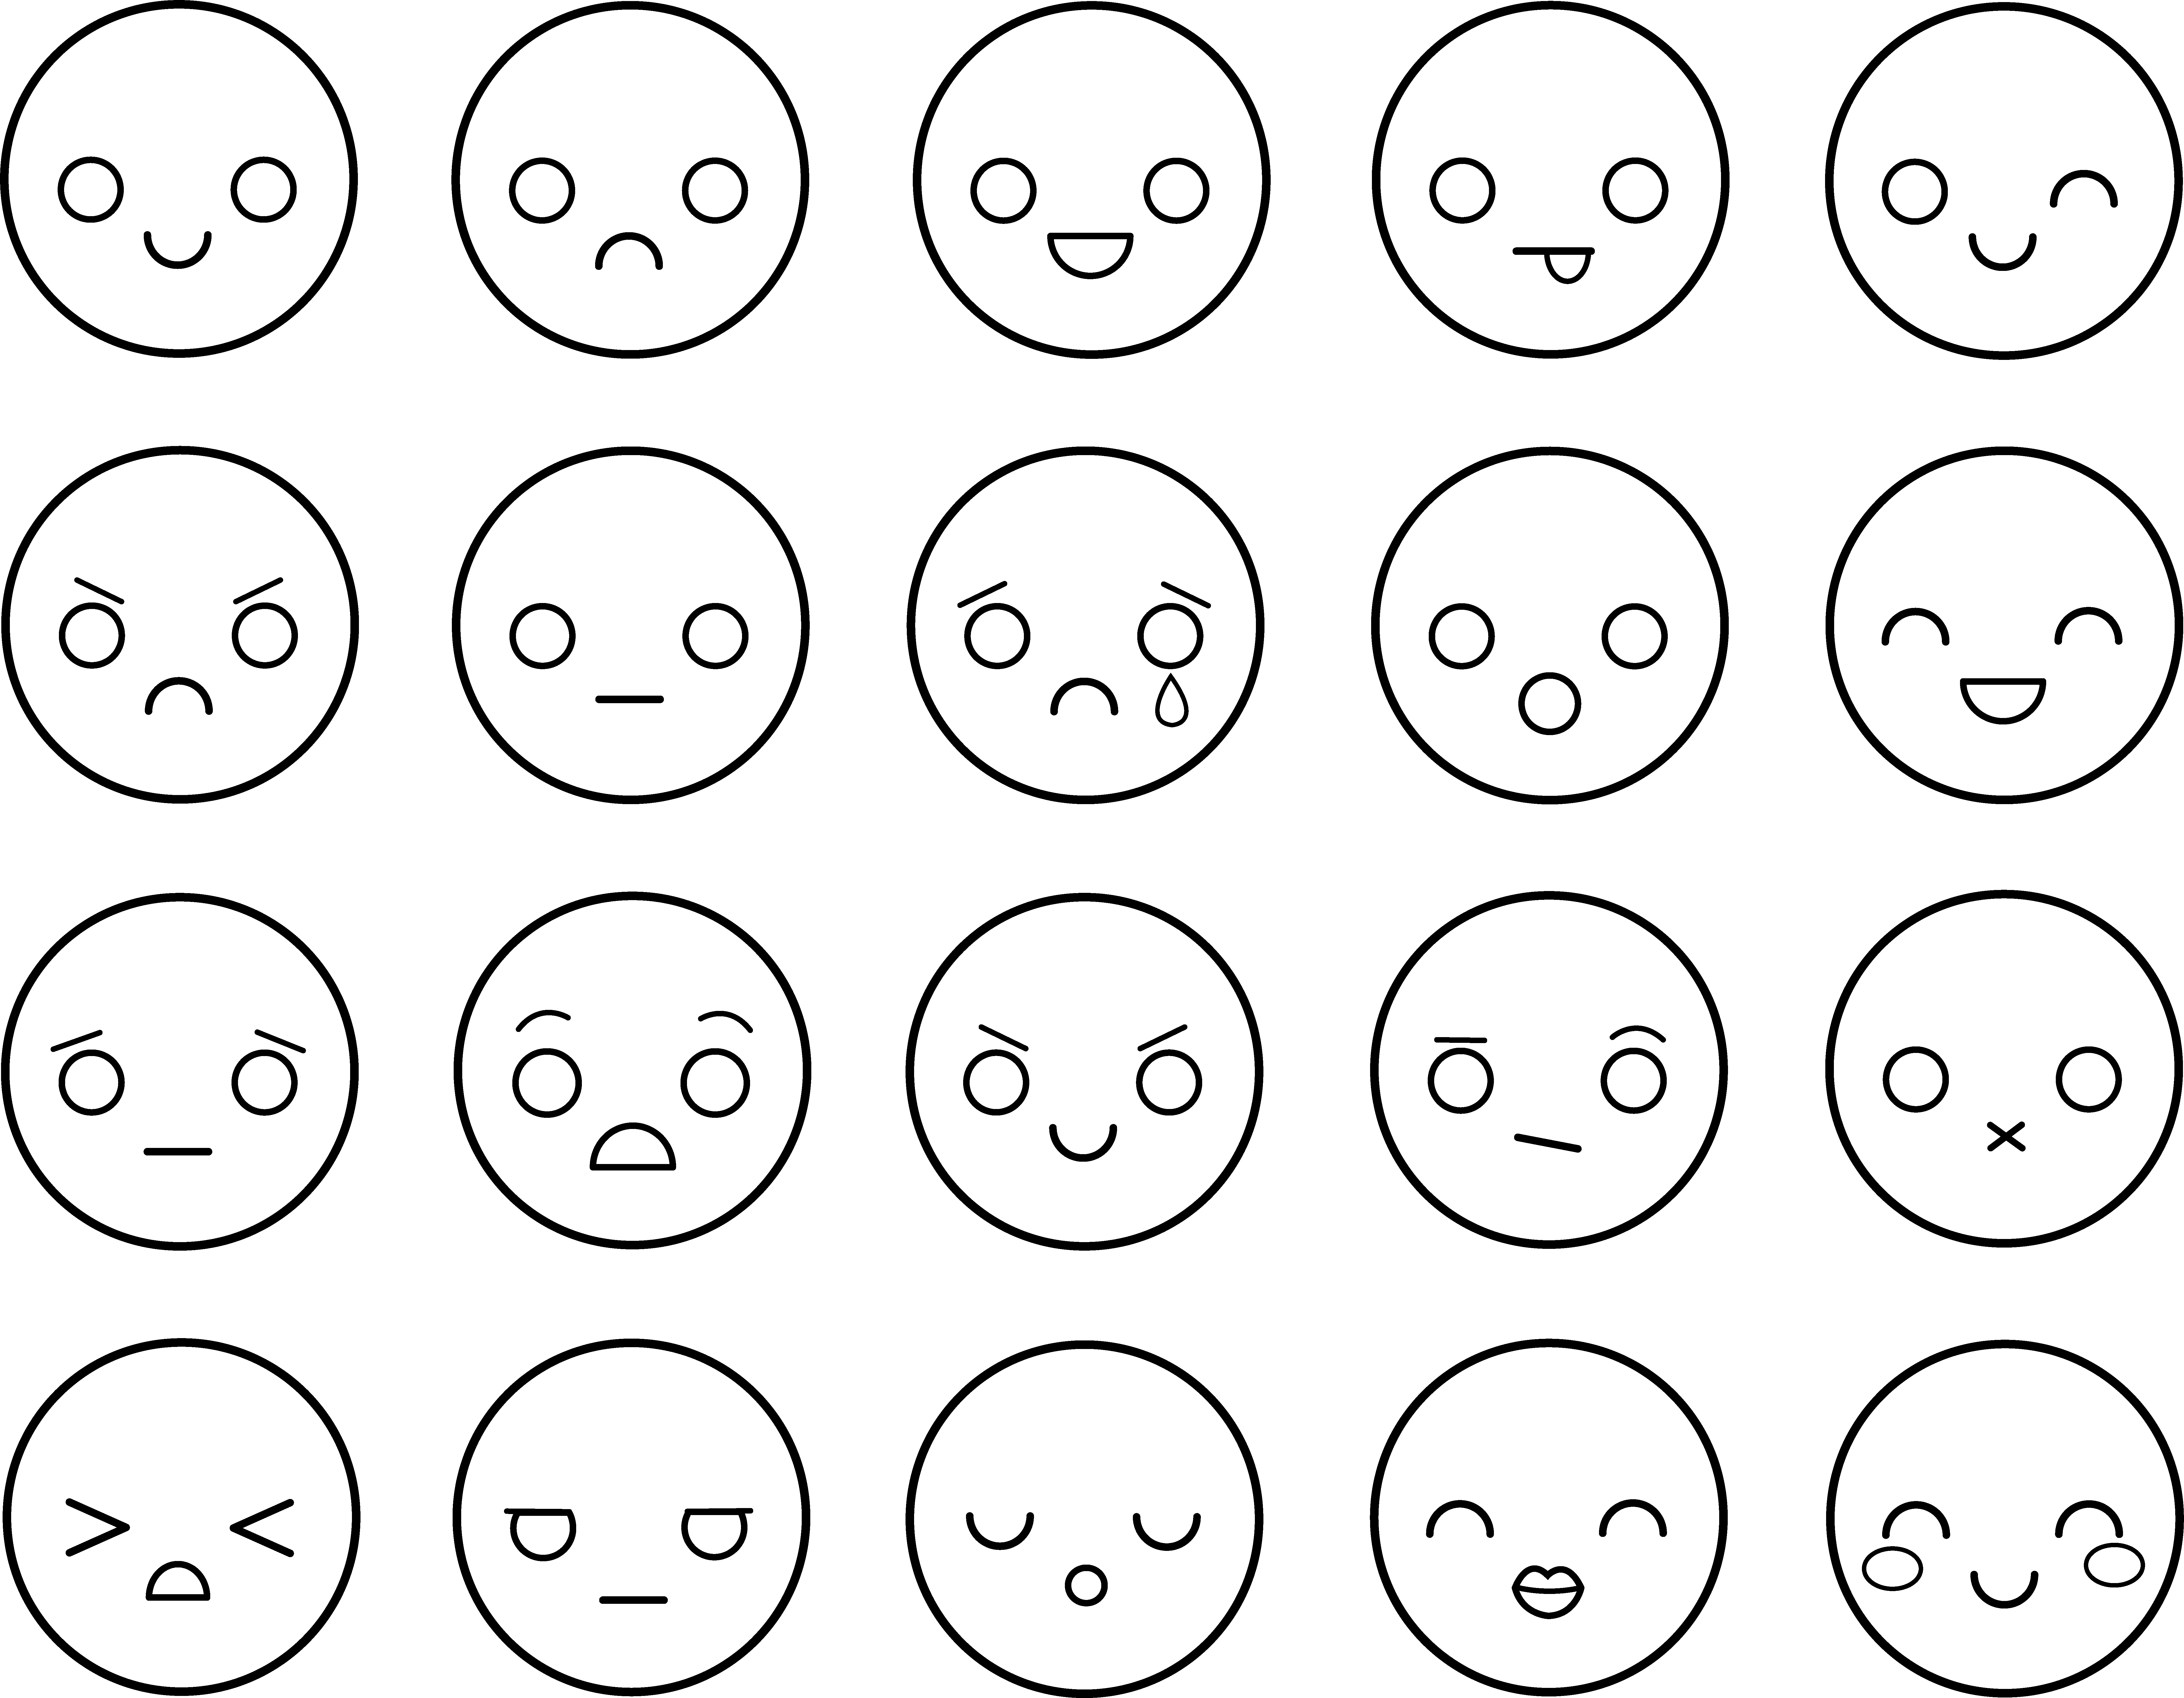 12 Black And White Emoticons Images